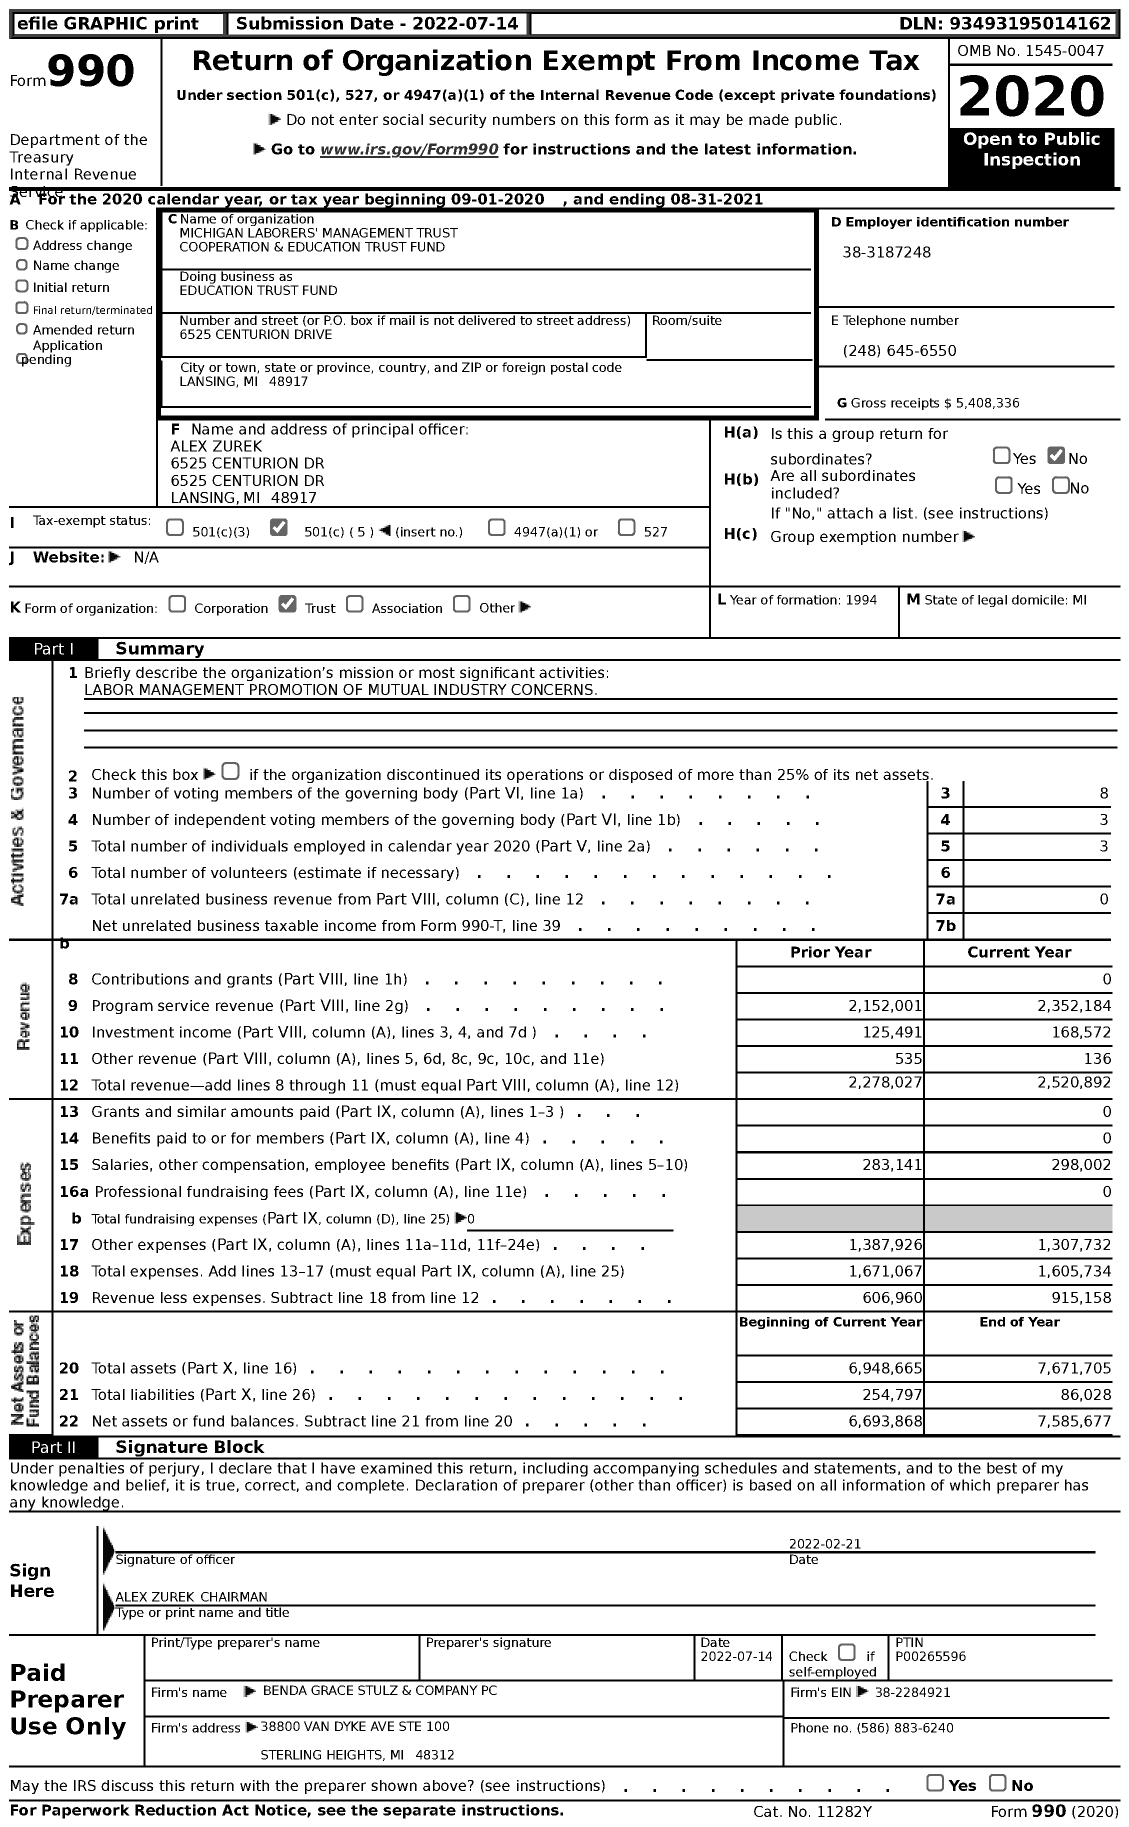 Image of first page of 2020 Form 990 for Michigan Laborers' Management Trust Cooperation and Education Trust Fund